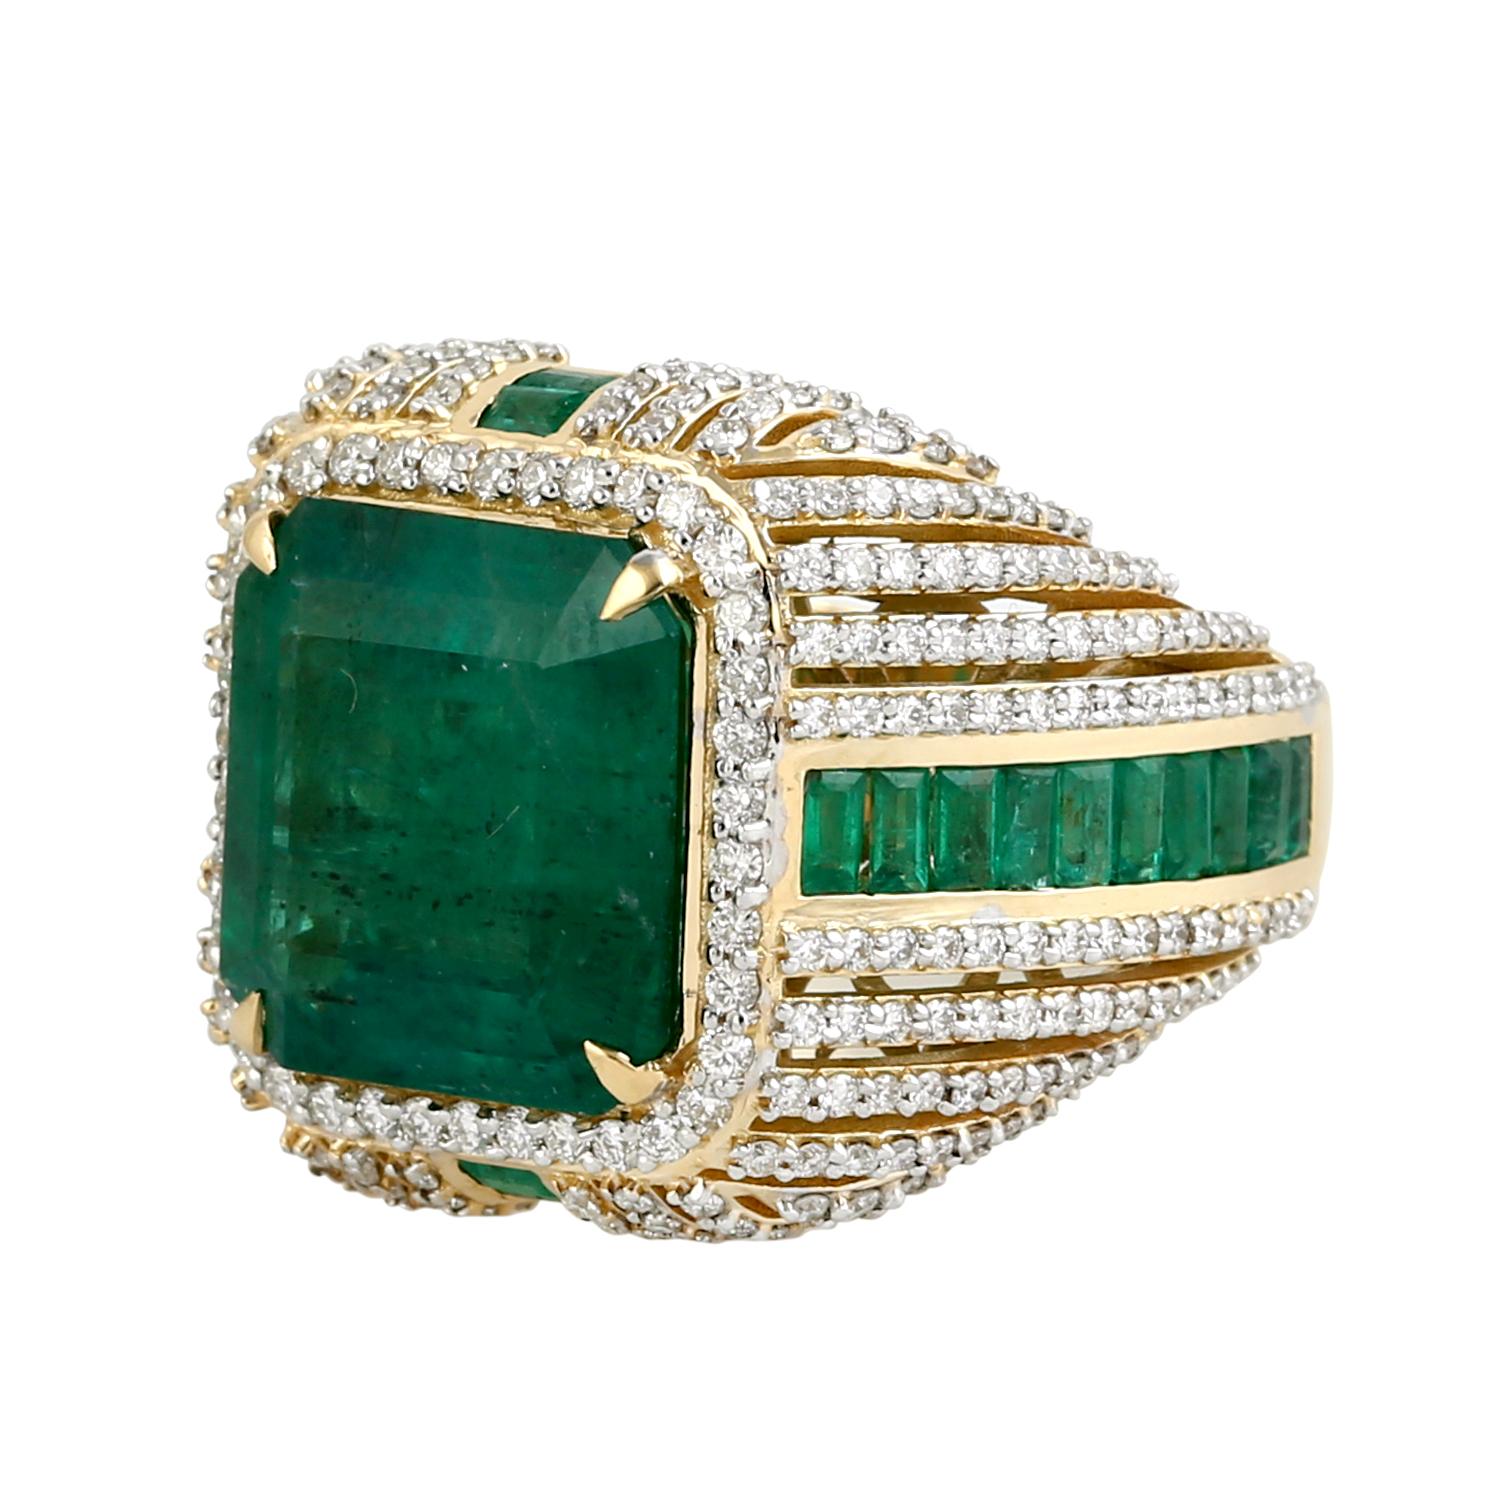 Art Deco Vintage Looking Zambian Emerald Cocktail Ring With Diamonds